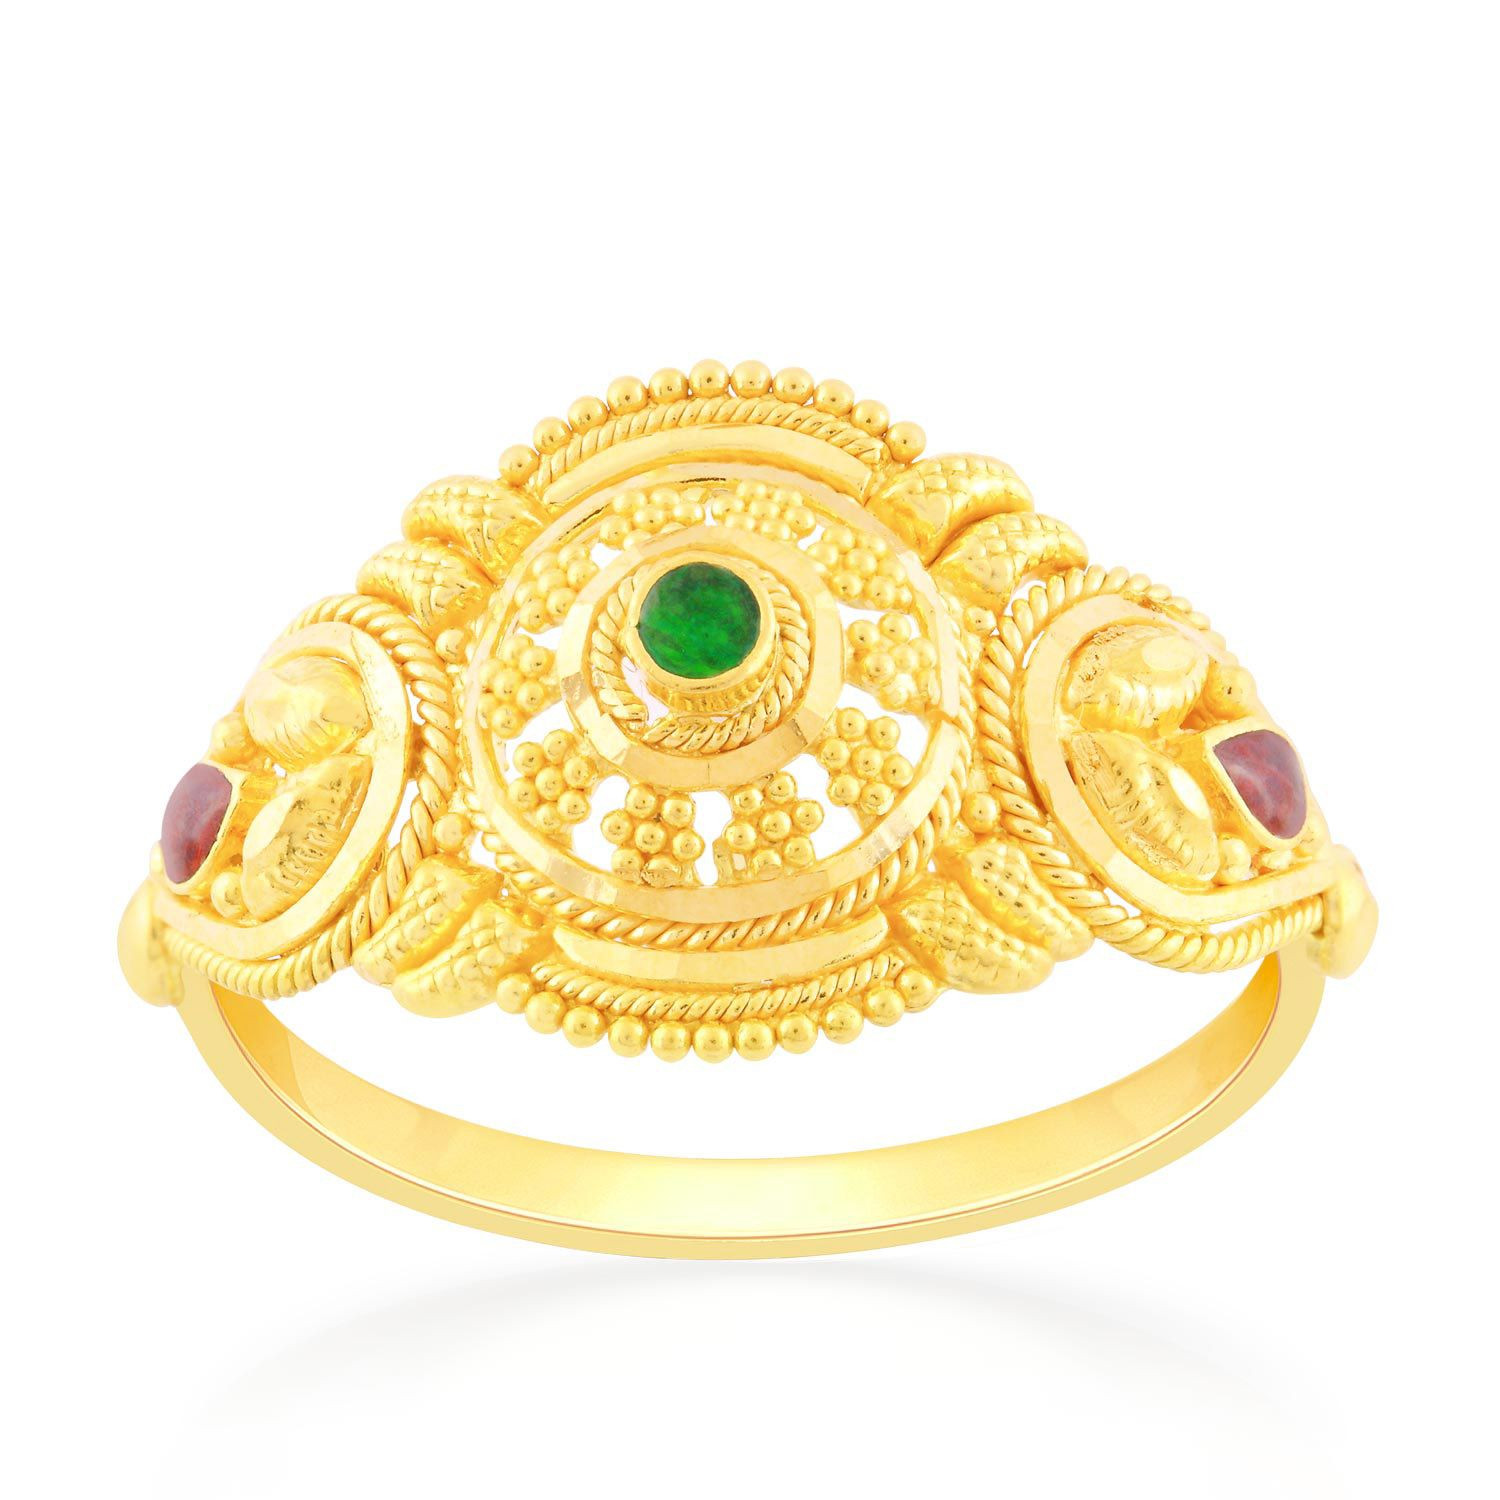 Buy MALABAR GOLD AND DIAMONDS Womens Malabar Gold Ring - Size 17 | Shoppers  Stop